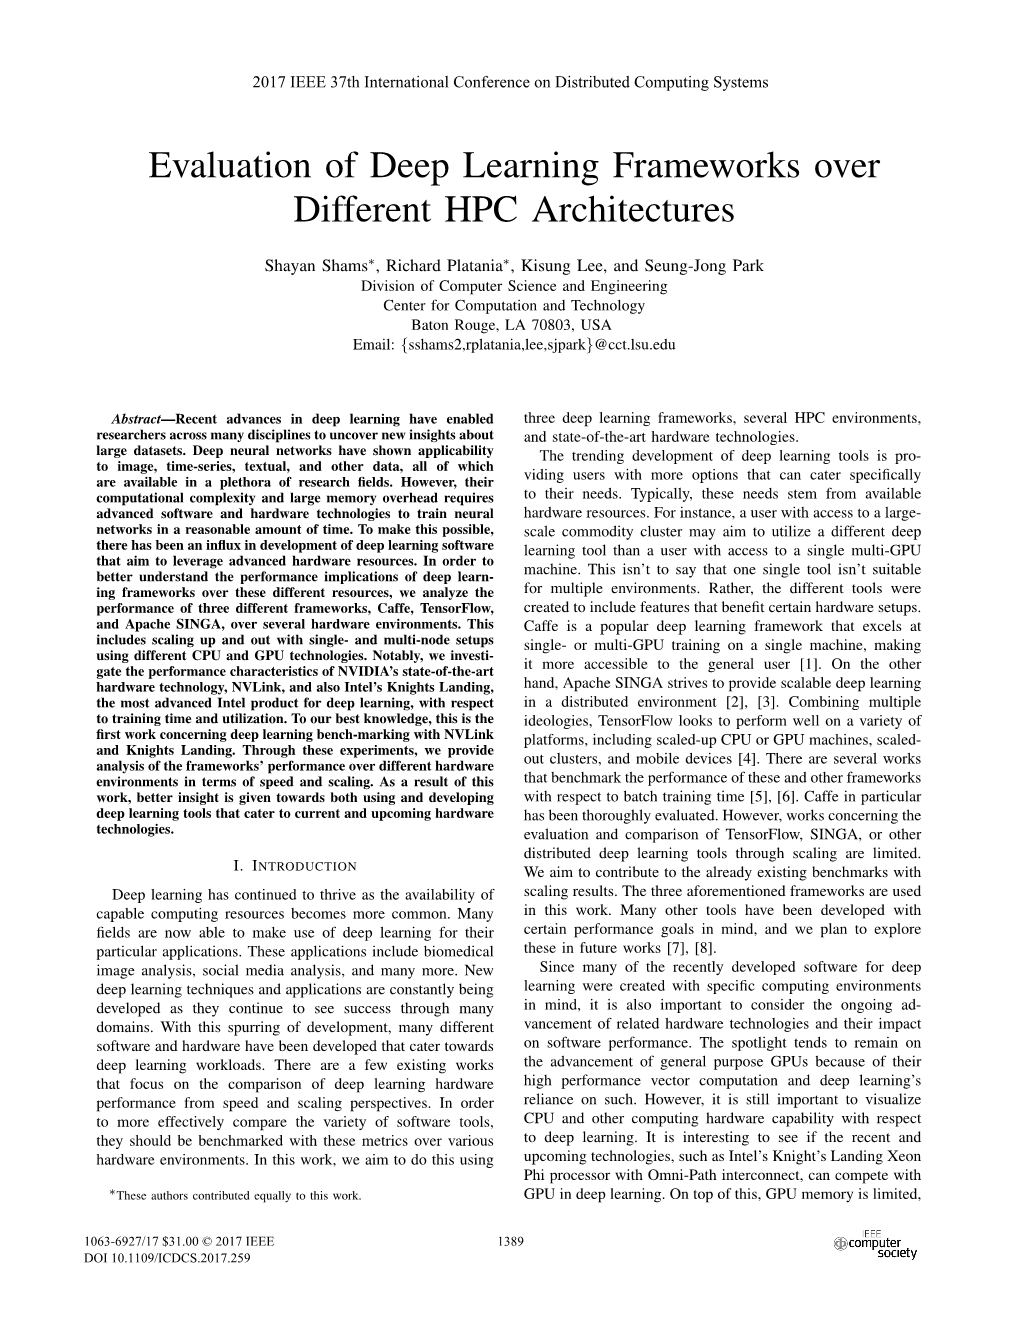 Evaluation of Deep Learning Frameworks Over Different HPC Architectures